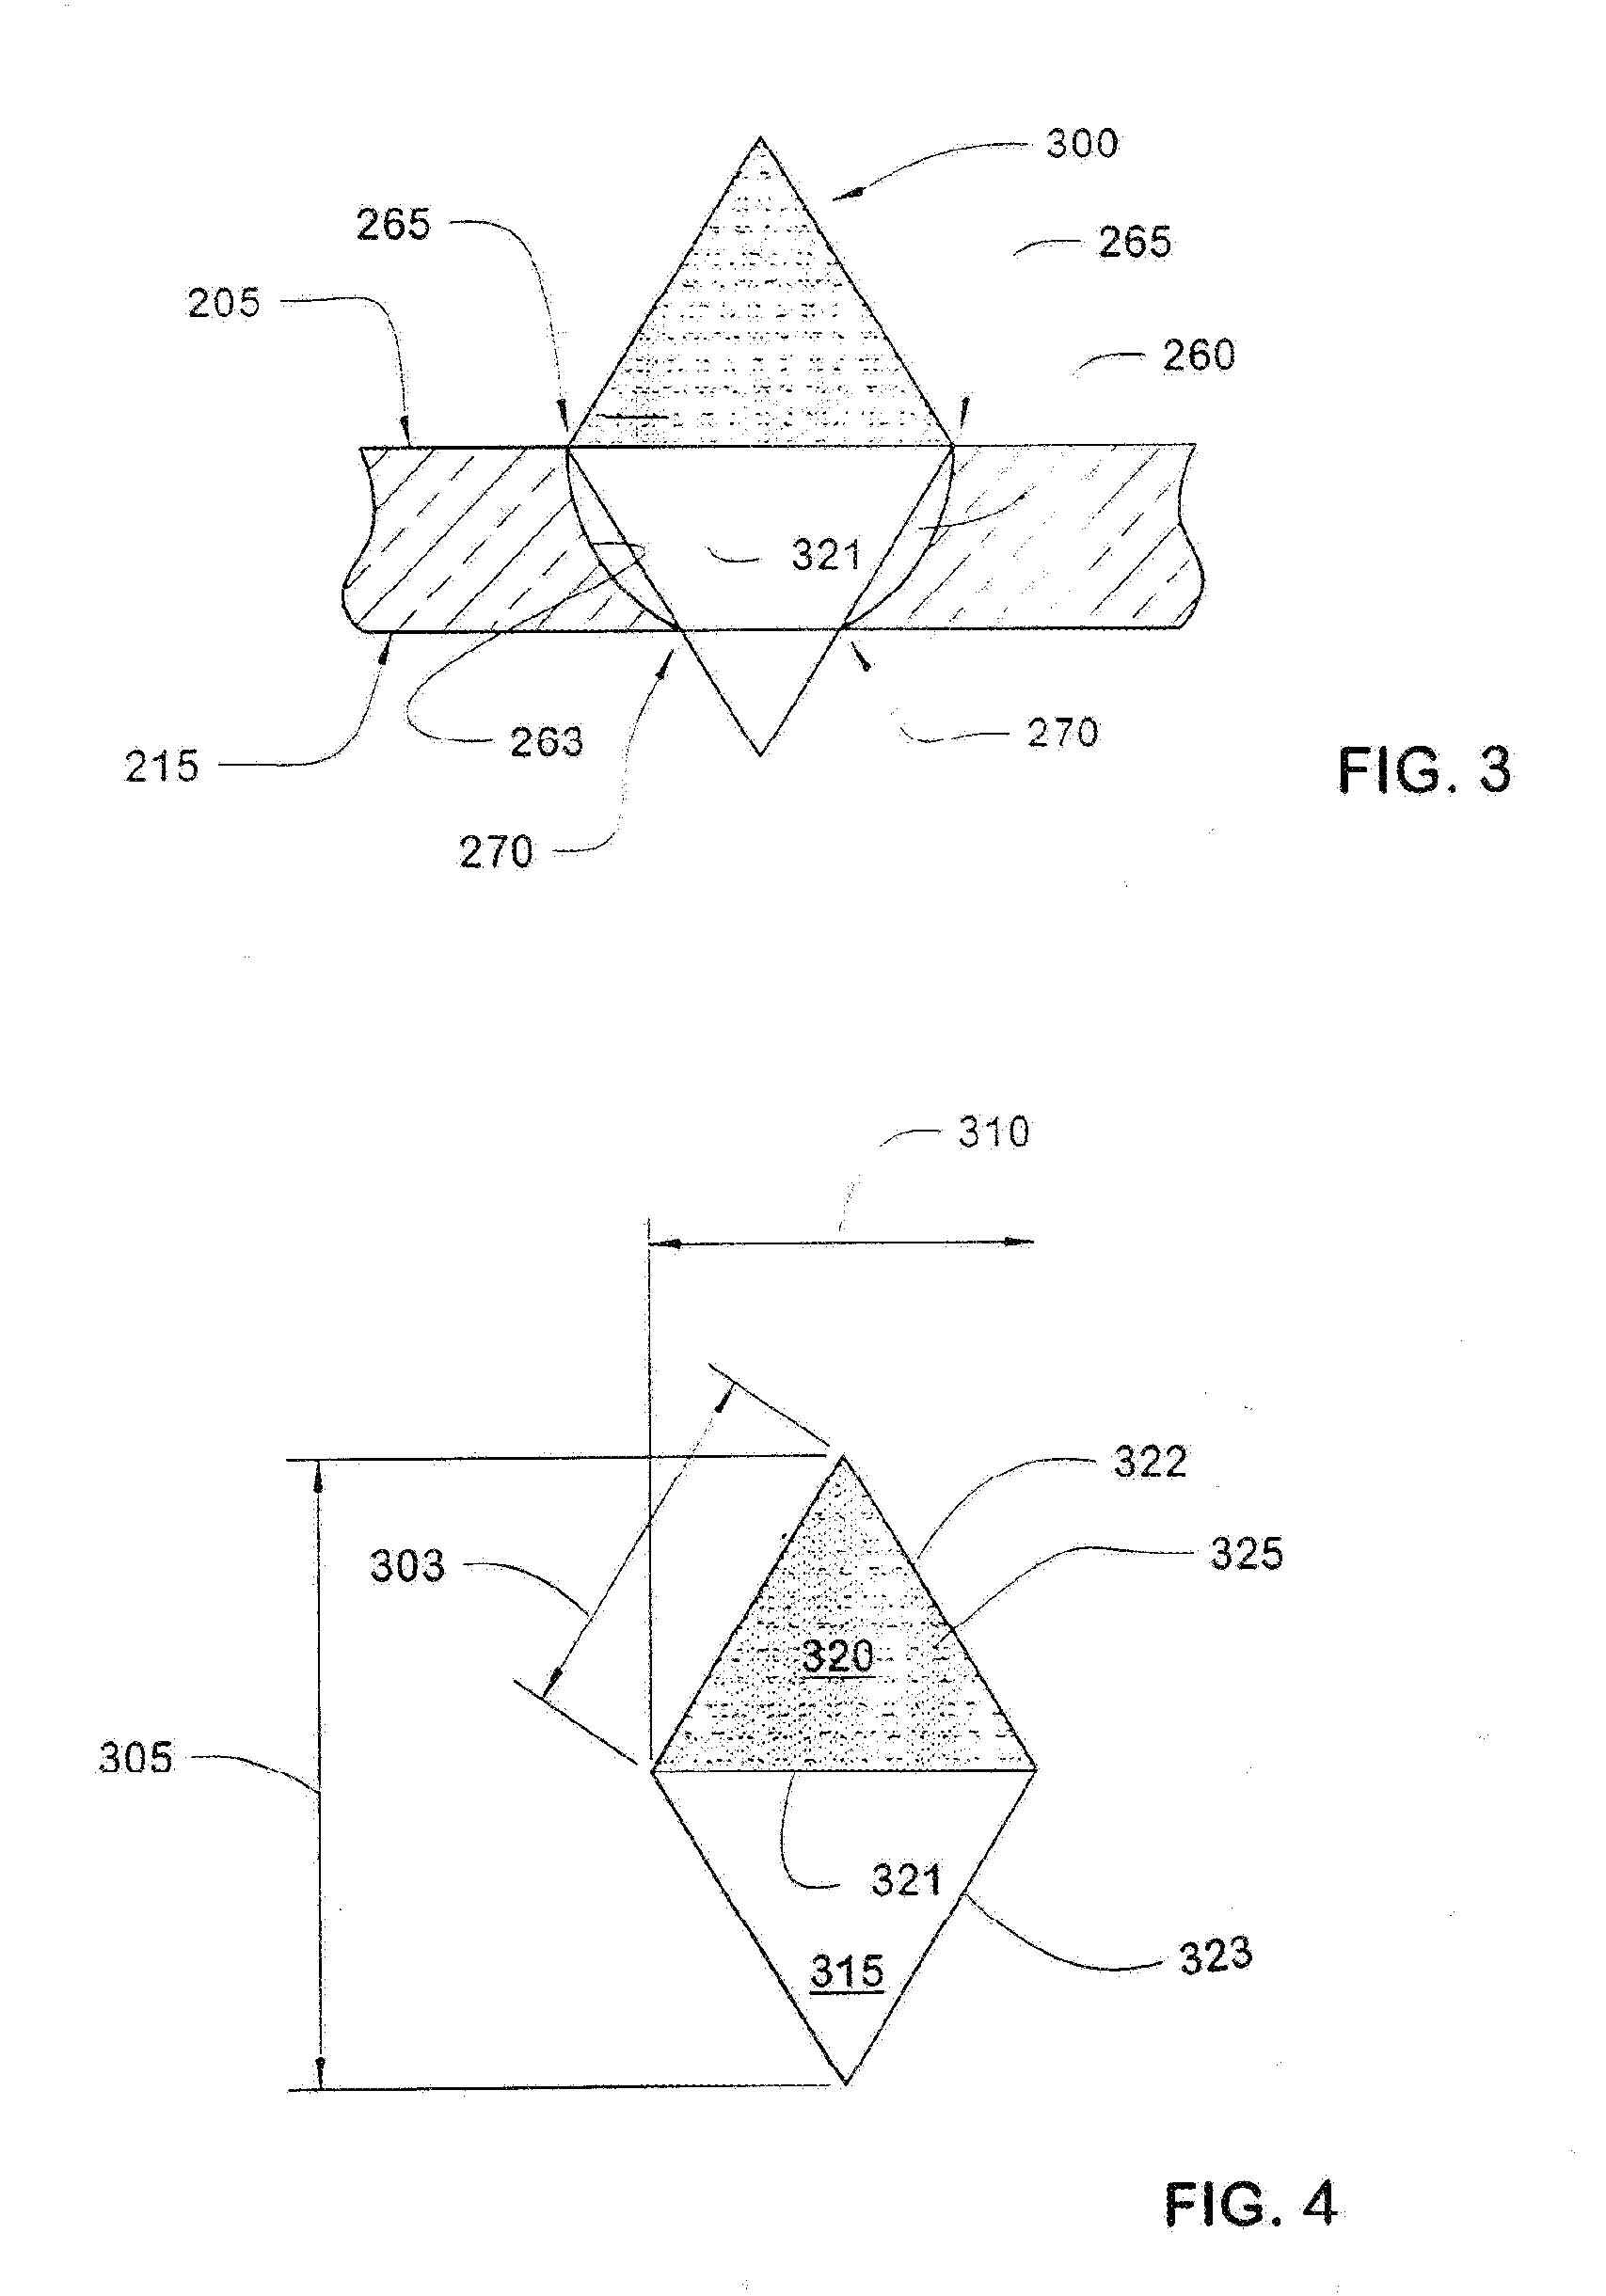 Method of Making an Apparatus for Forming Concrete